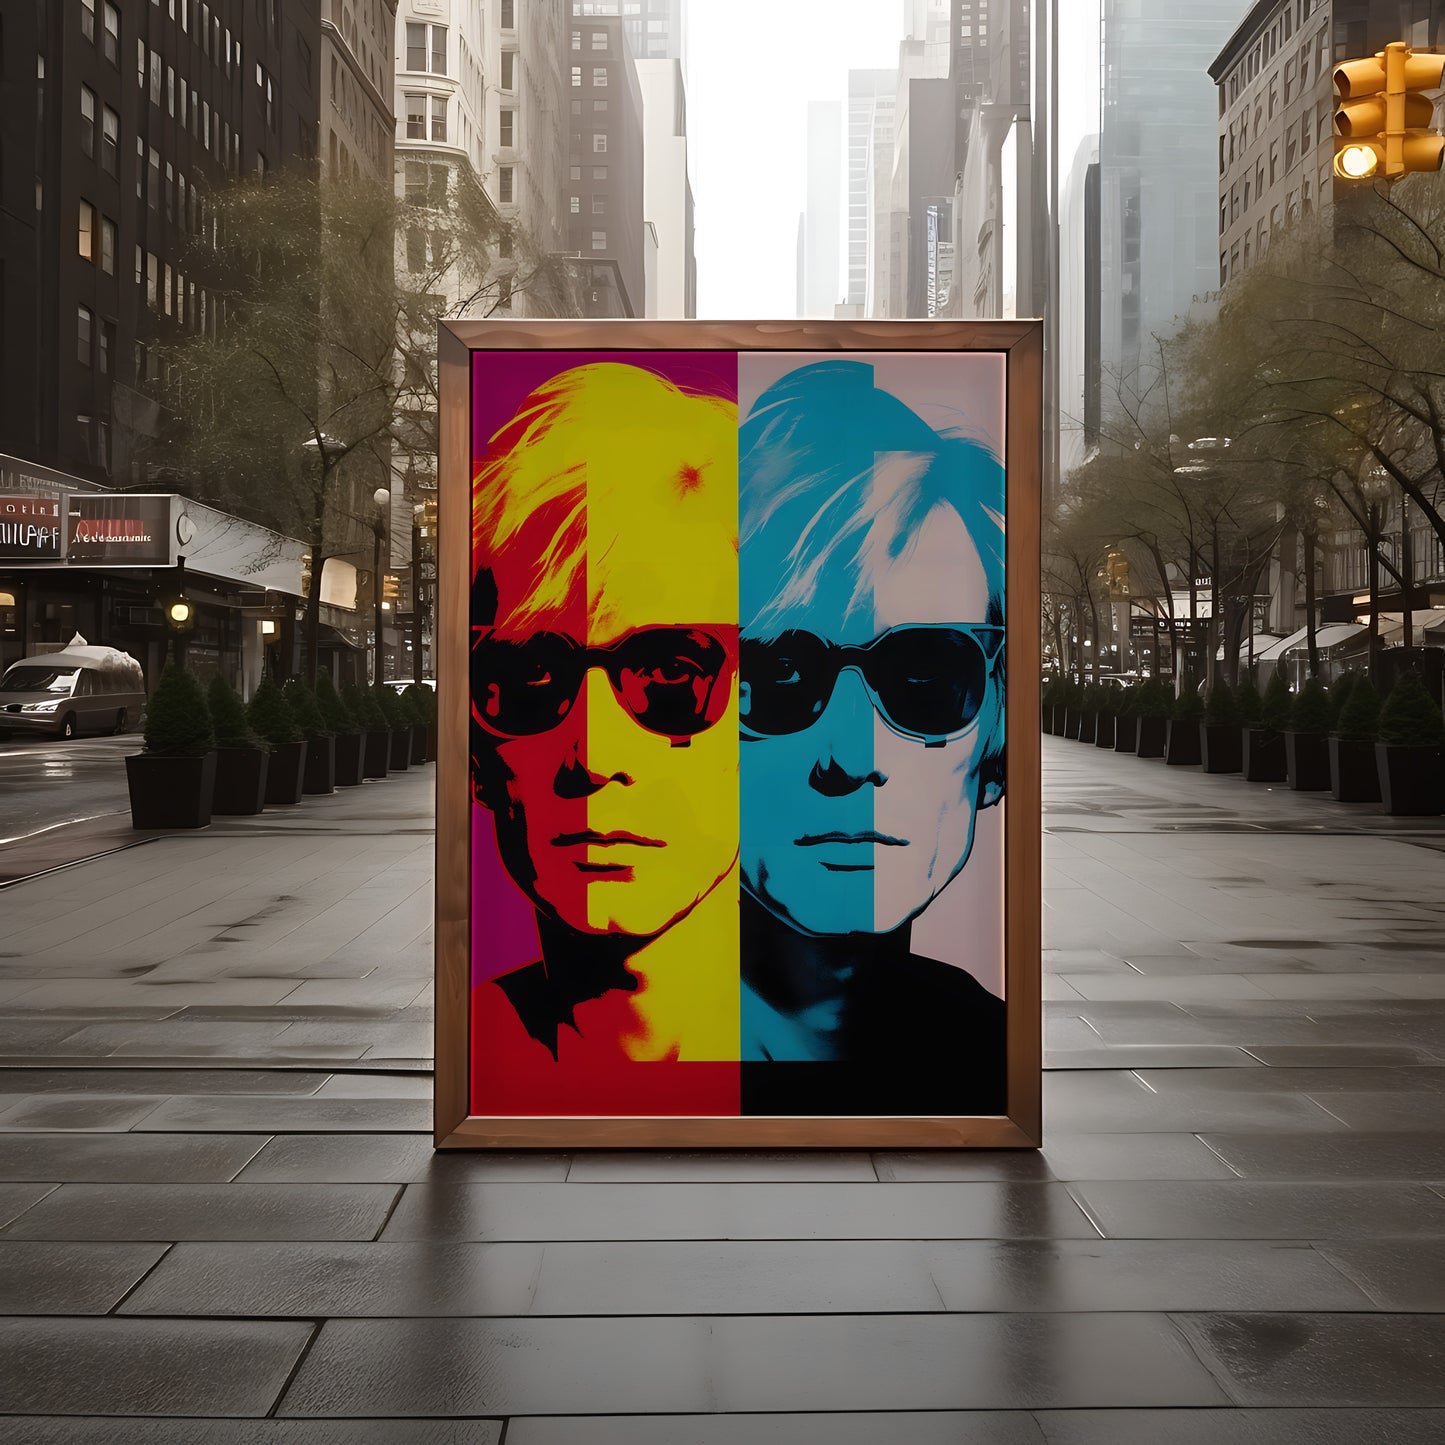 Colorful pop art portrait of a man in sunglasses displayed on a city street.